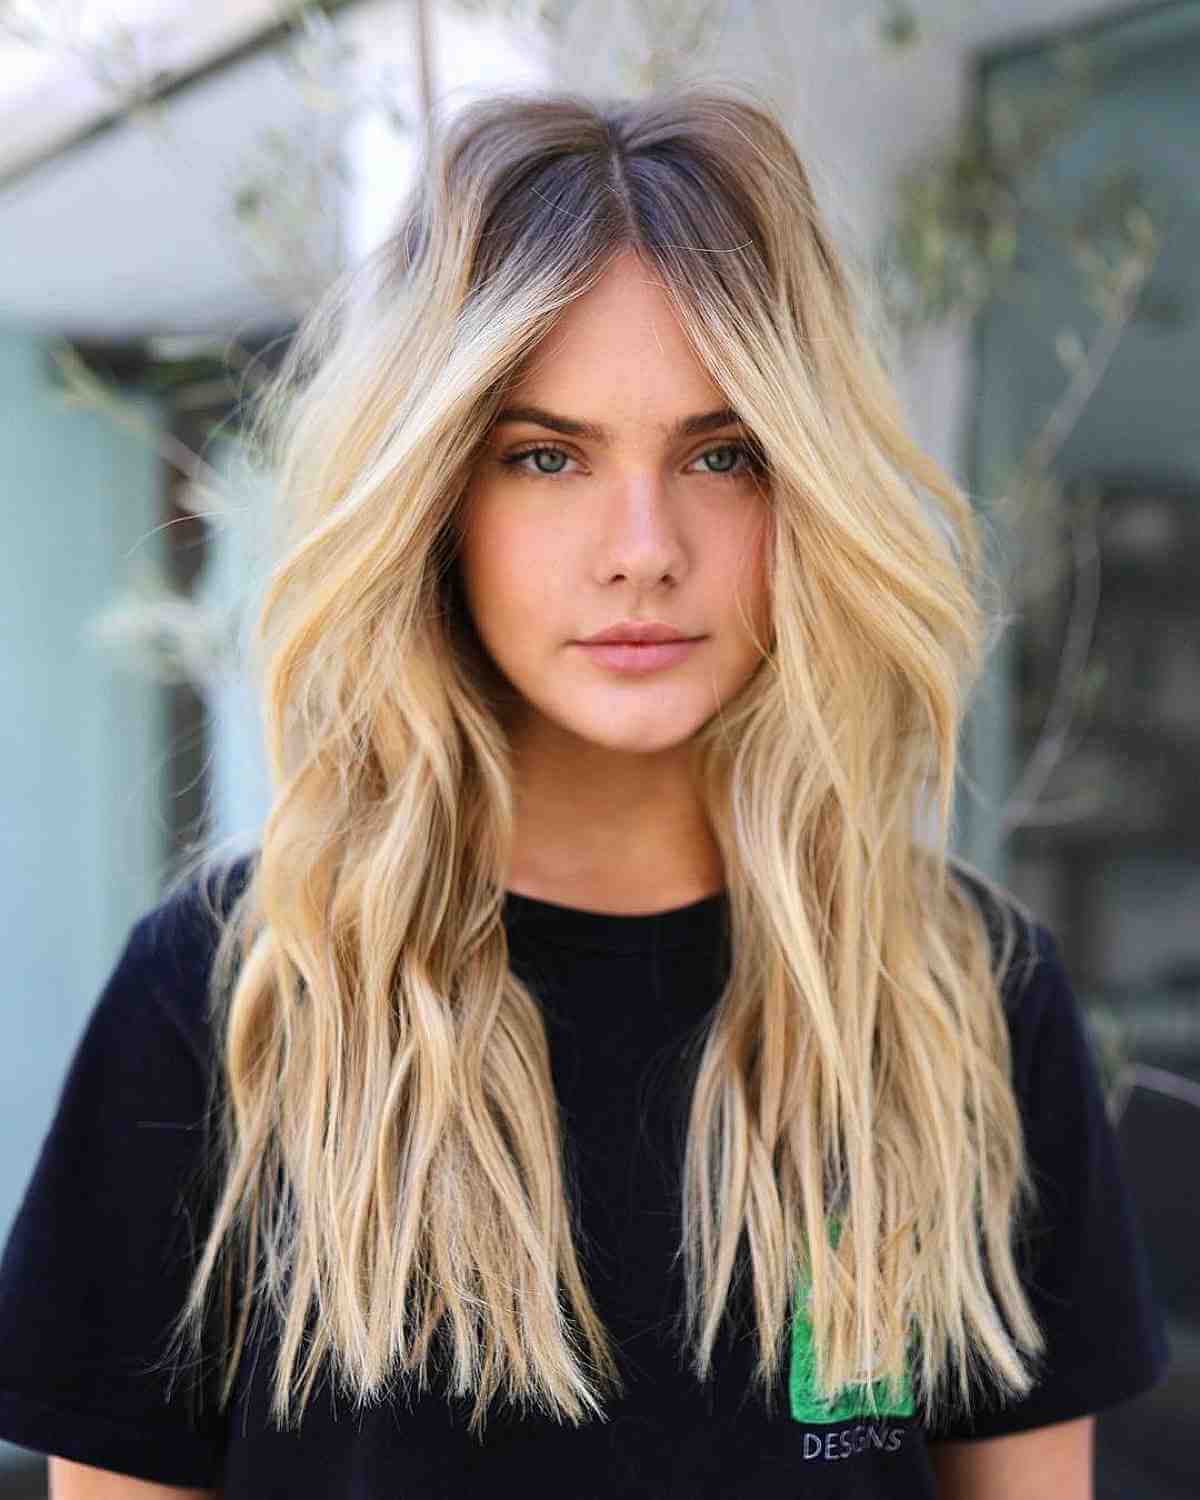 Bangs for long hair that is parted in the middle